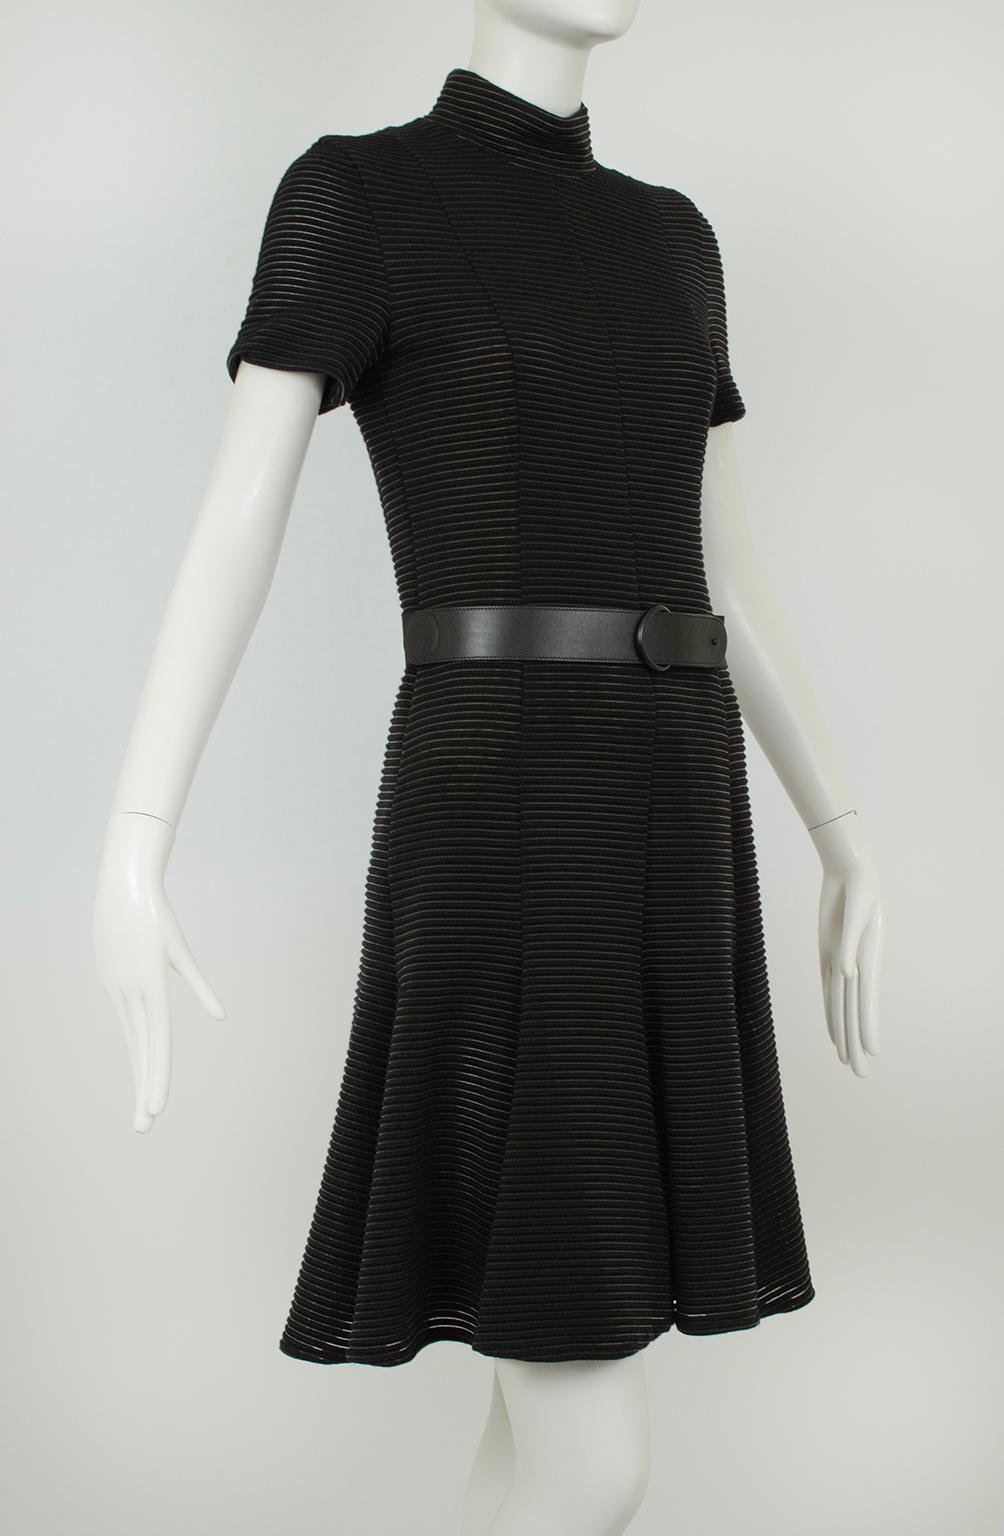 Black Akris Illusion Ribbed Fit and Flare Day Dress, Original Tags – S, 2012 In Excellent Condition For Sale In Tucson, AZ